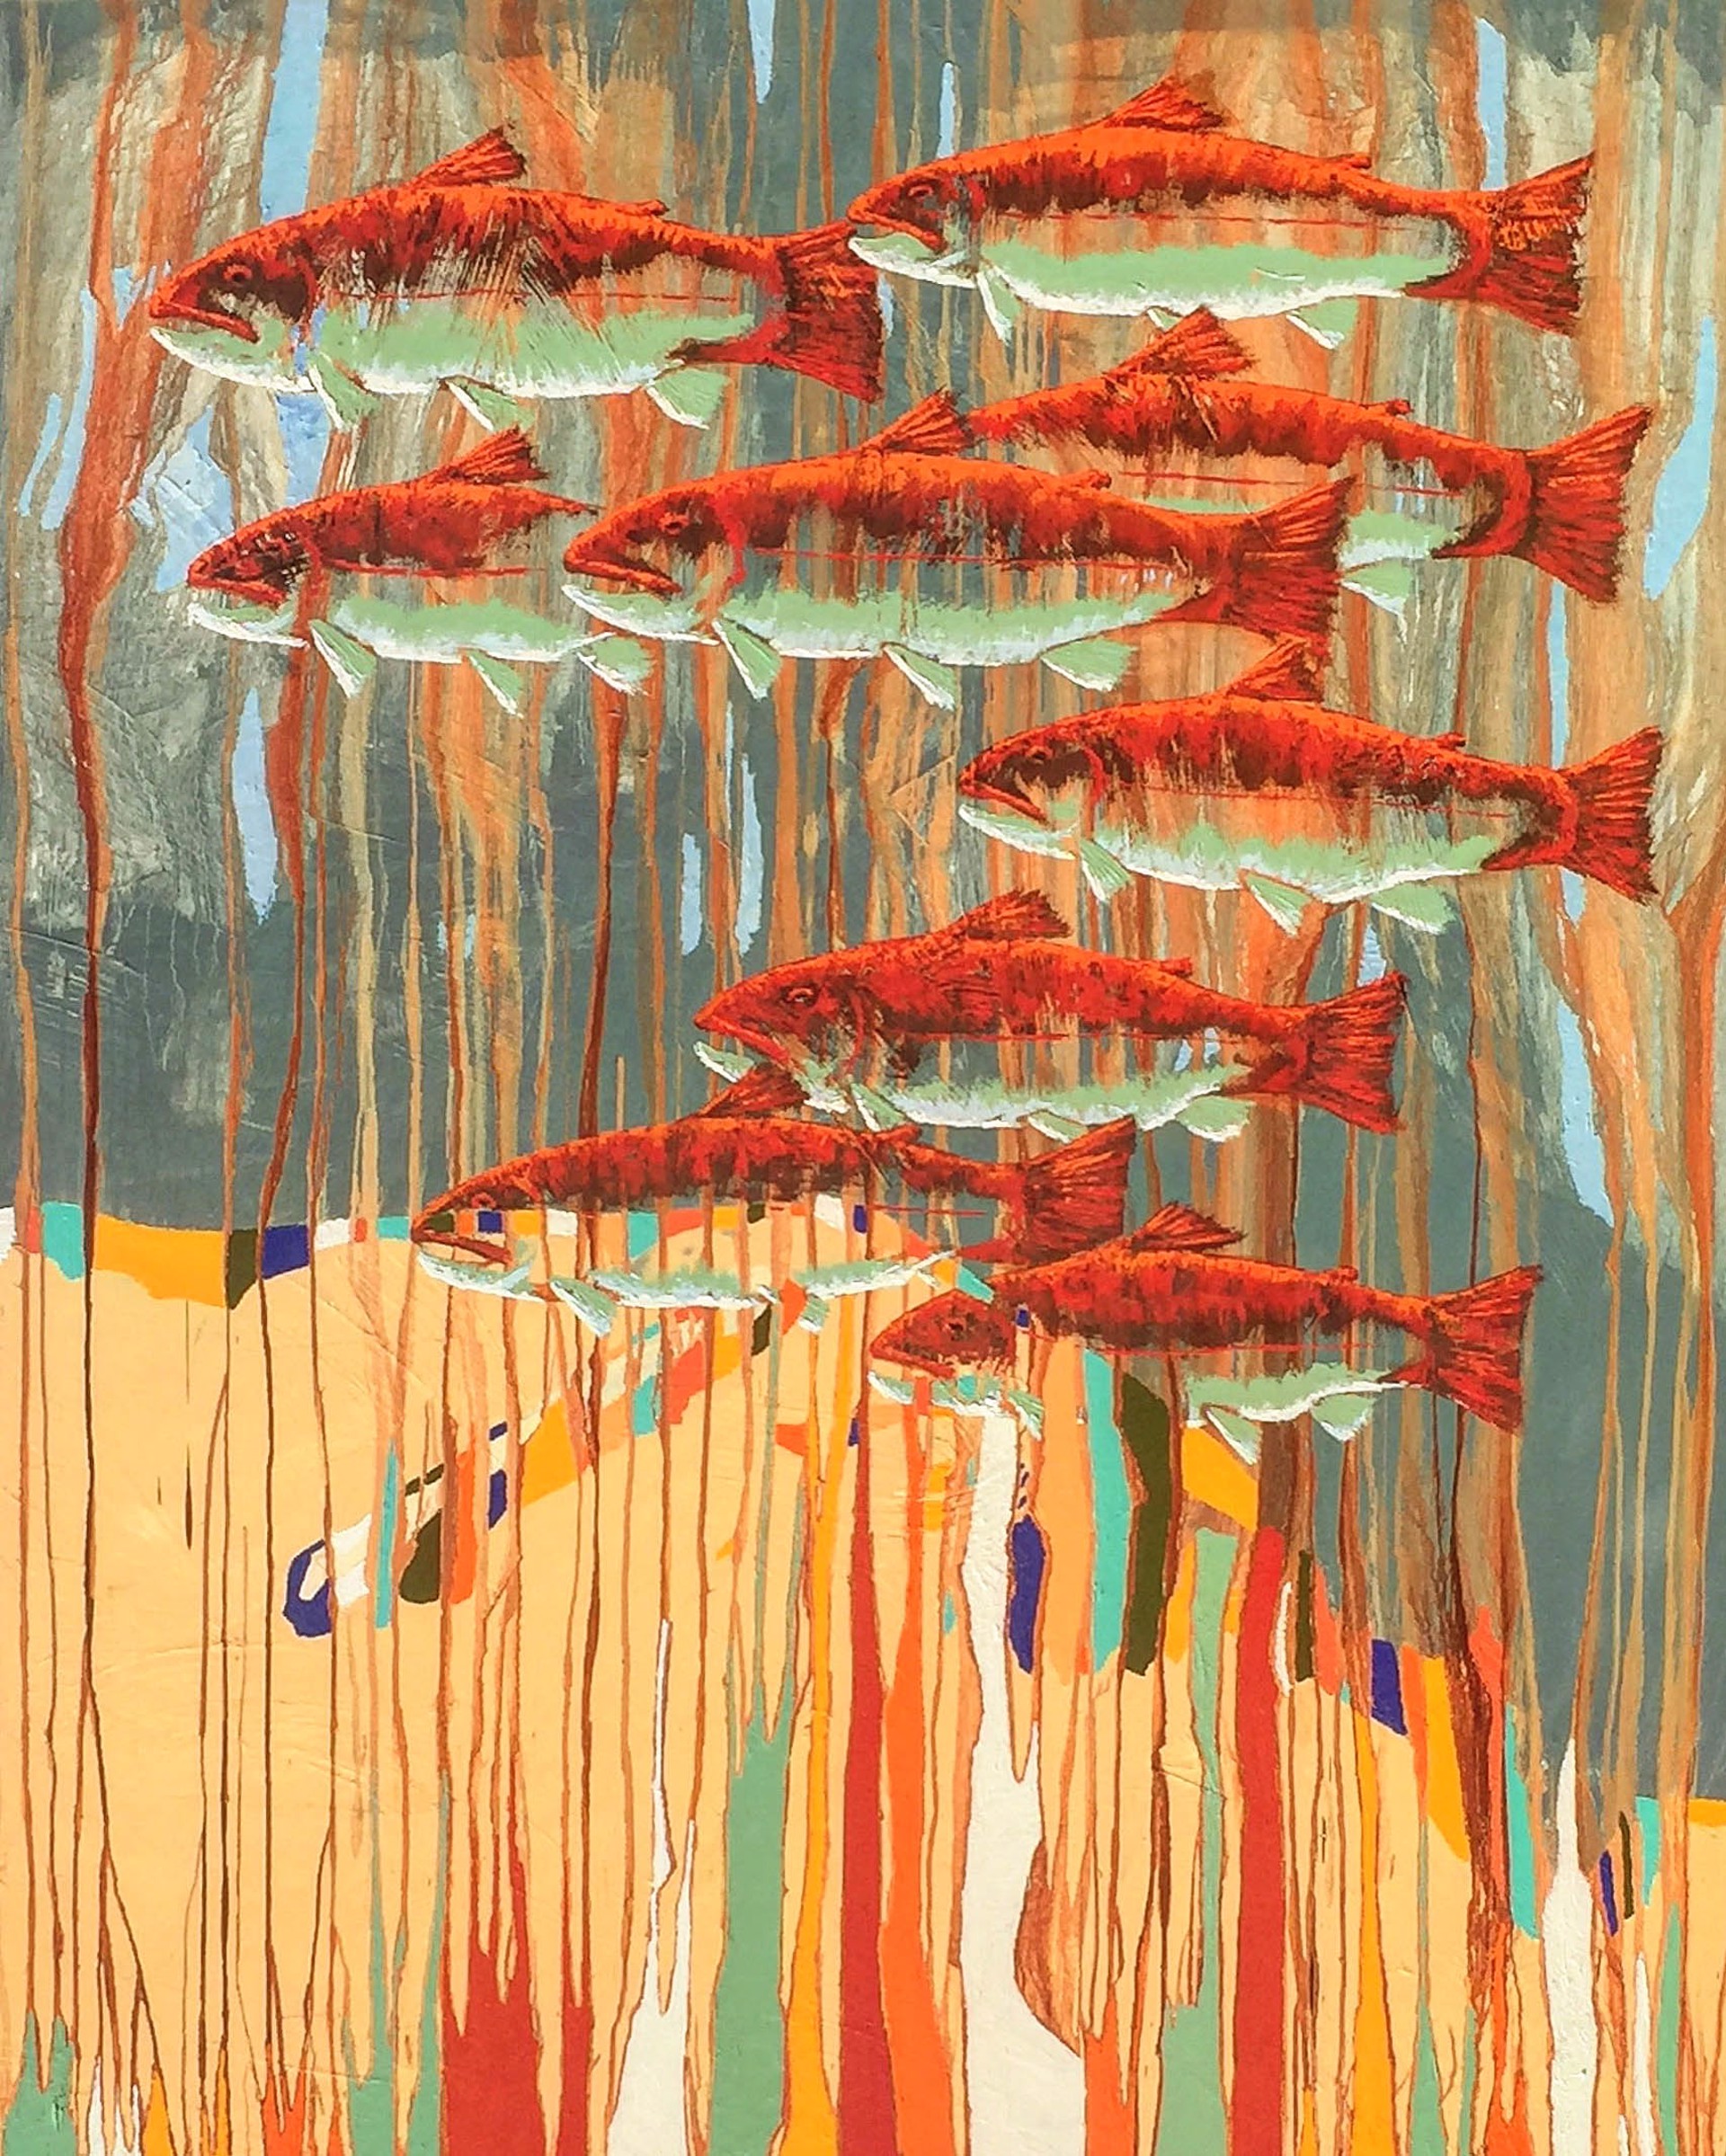 A Contemporary Western Painting Of Trout On An Abstract Background At Gallery Wild